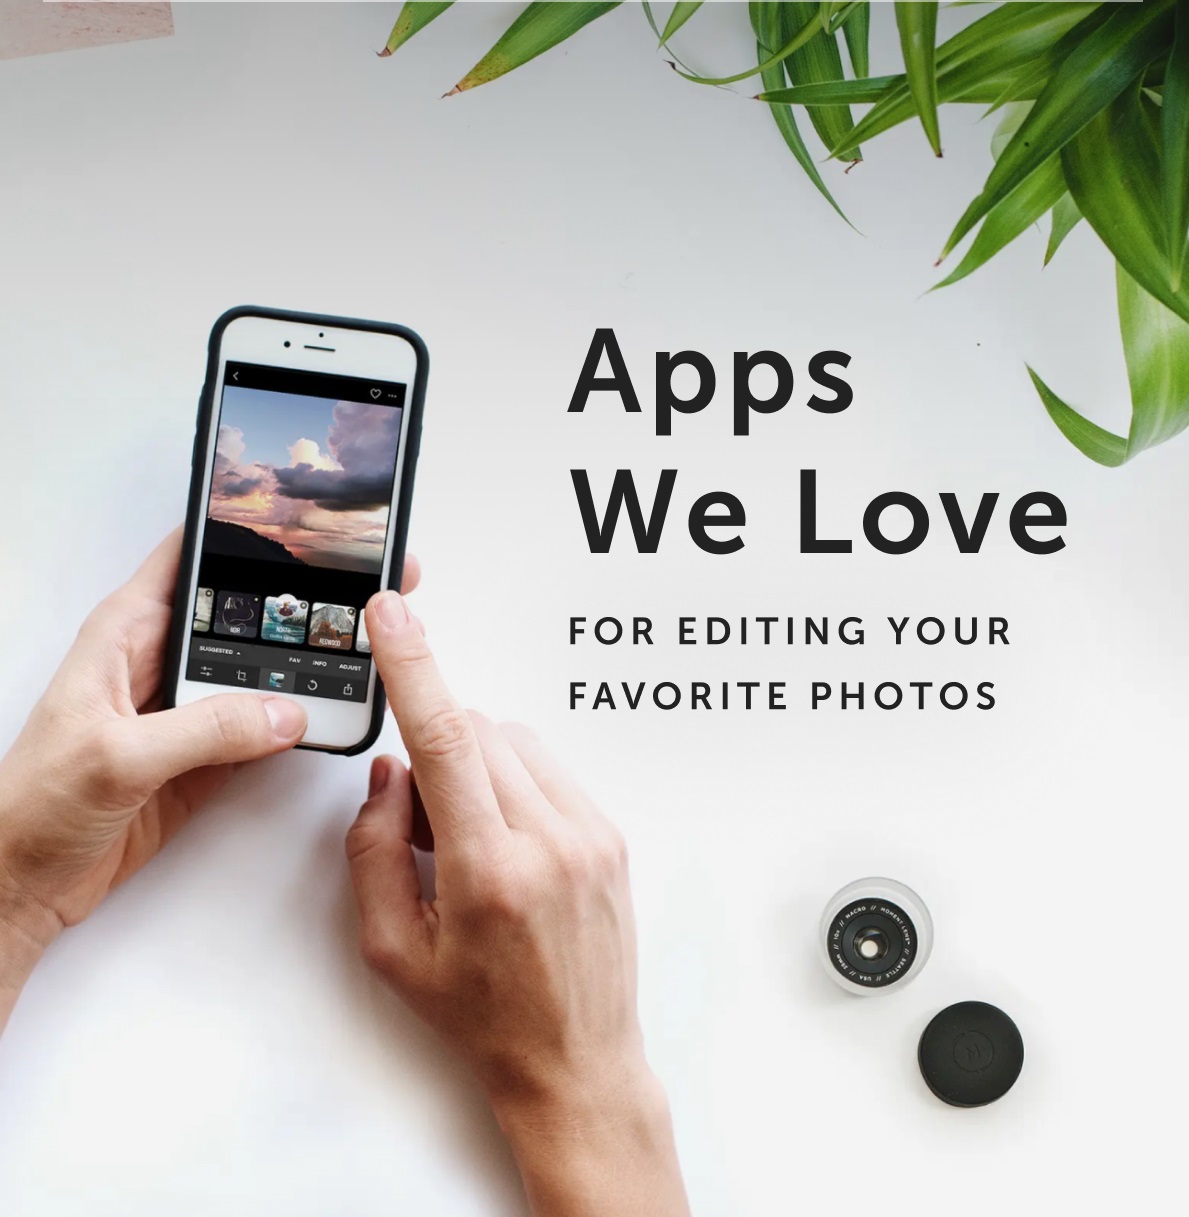 App-Gallery-5-Best-Apps-that-We-Love-for-Editing-Photos